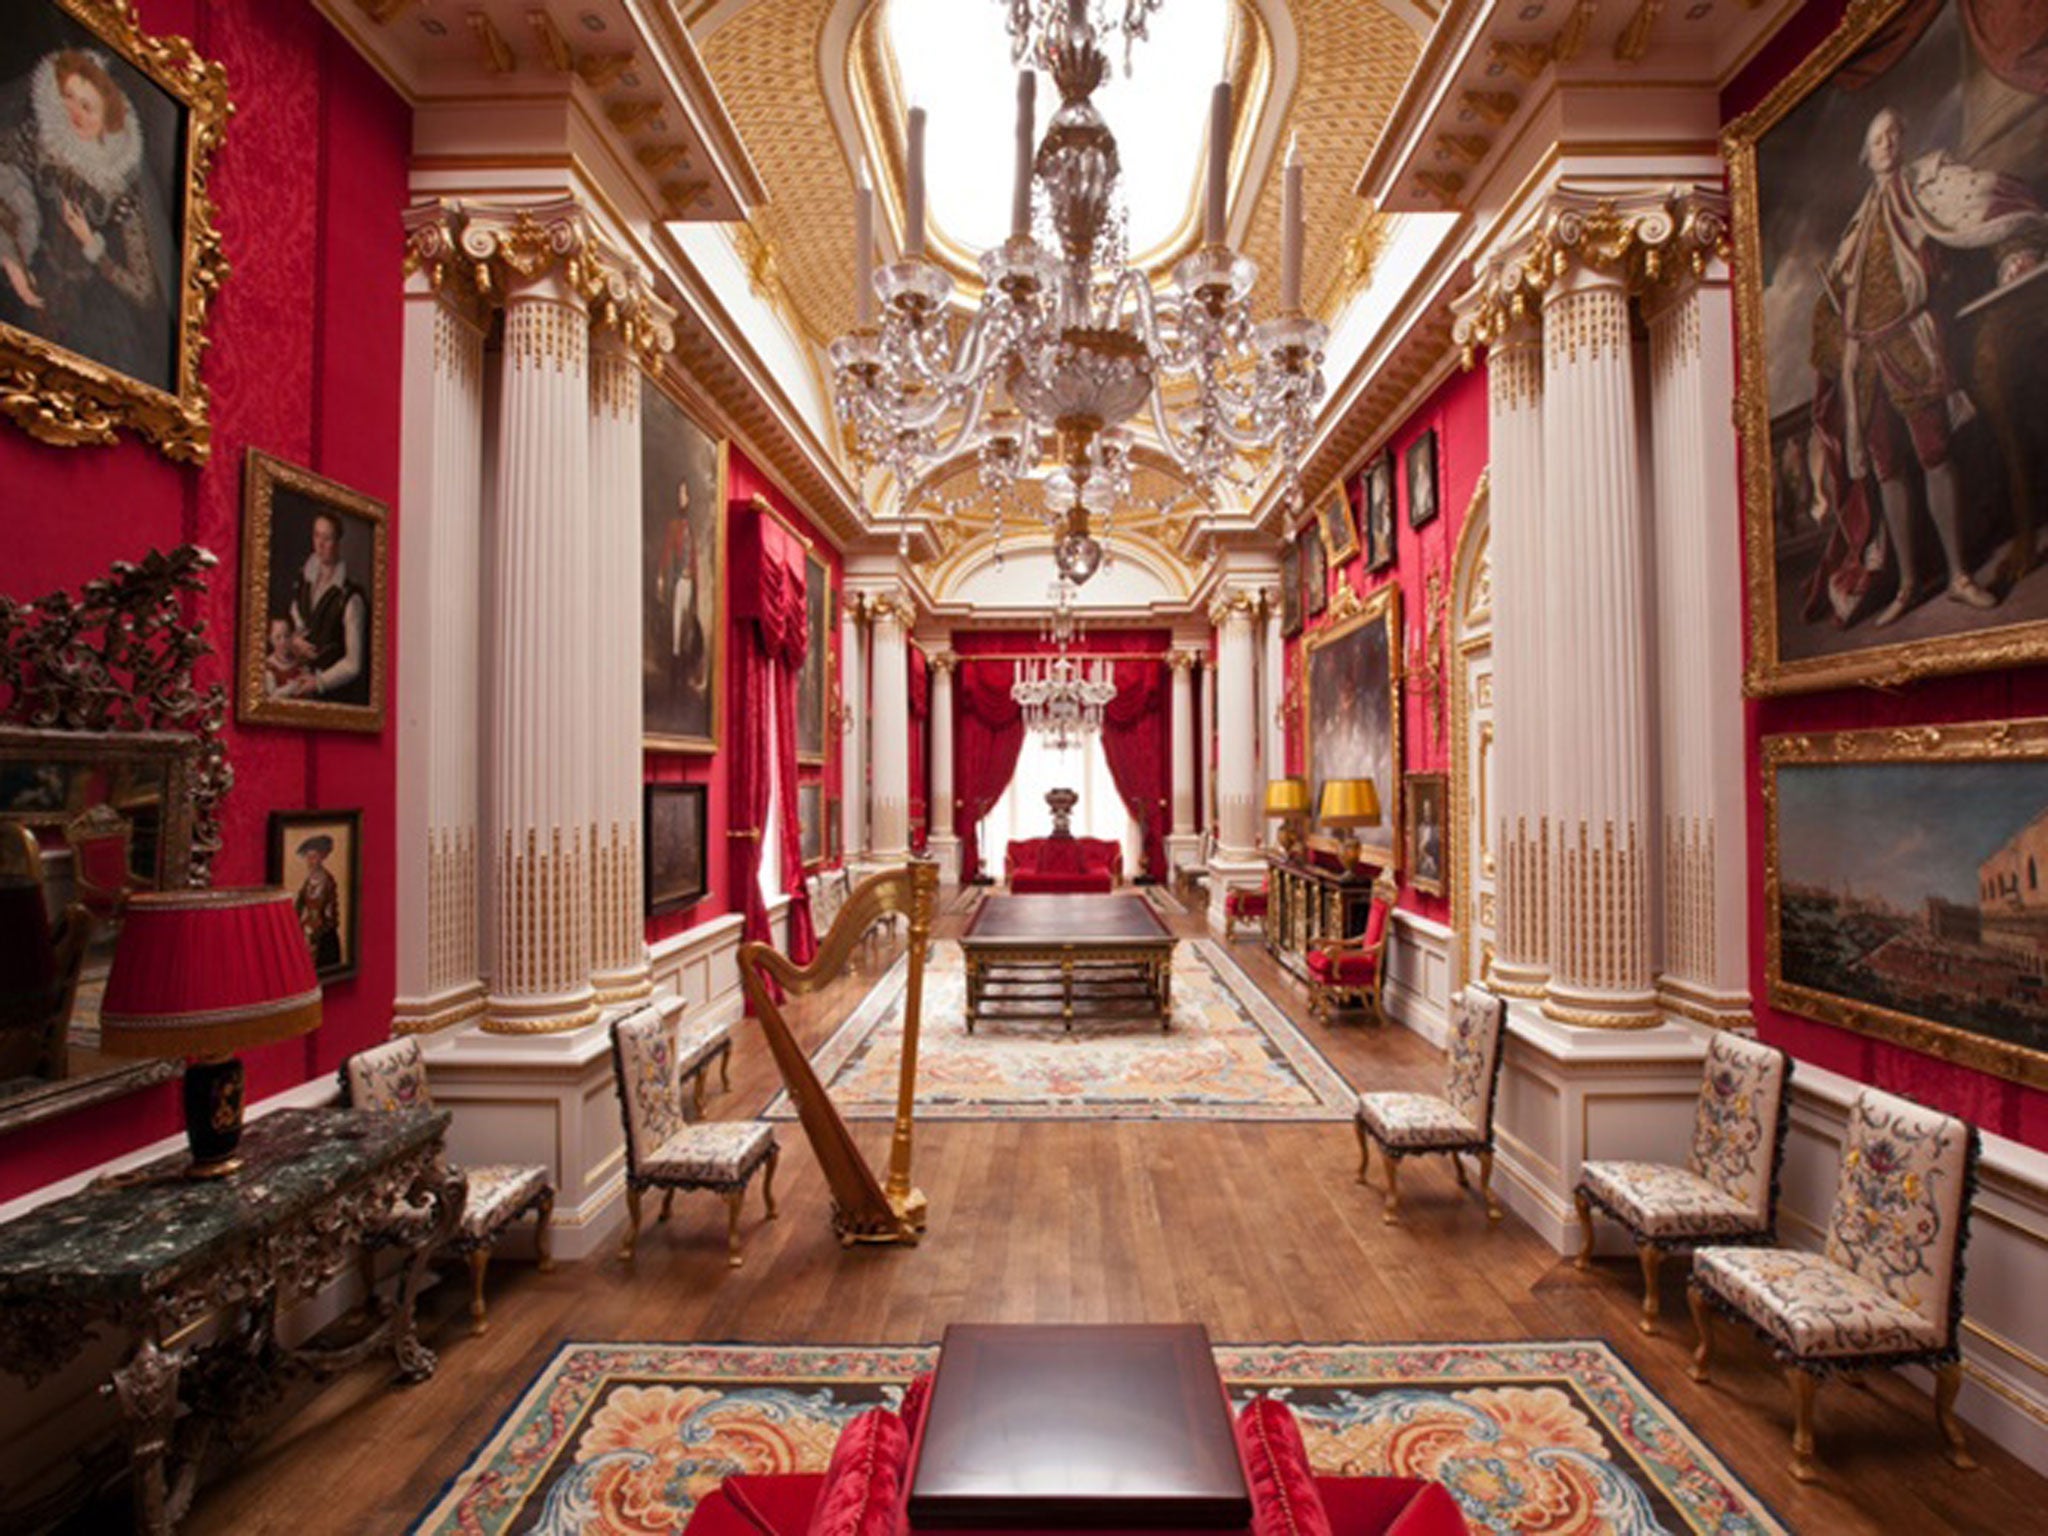 The interior of the £200 million Dudley House on Park Lane, the London home of Sheikh Hamad bin Abdullah Al Than, the cousin of Qatar’s emir